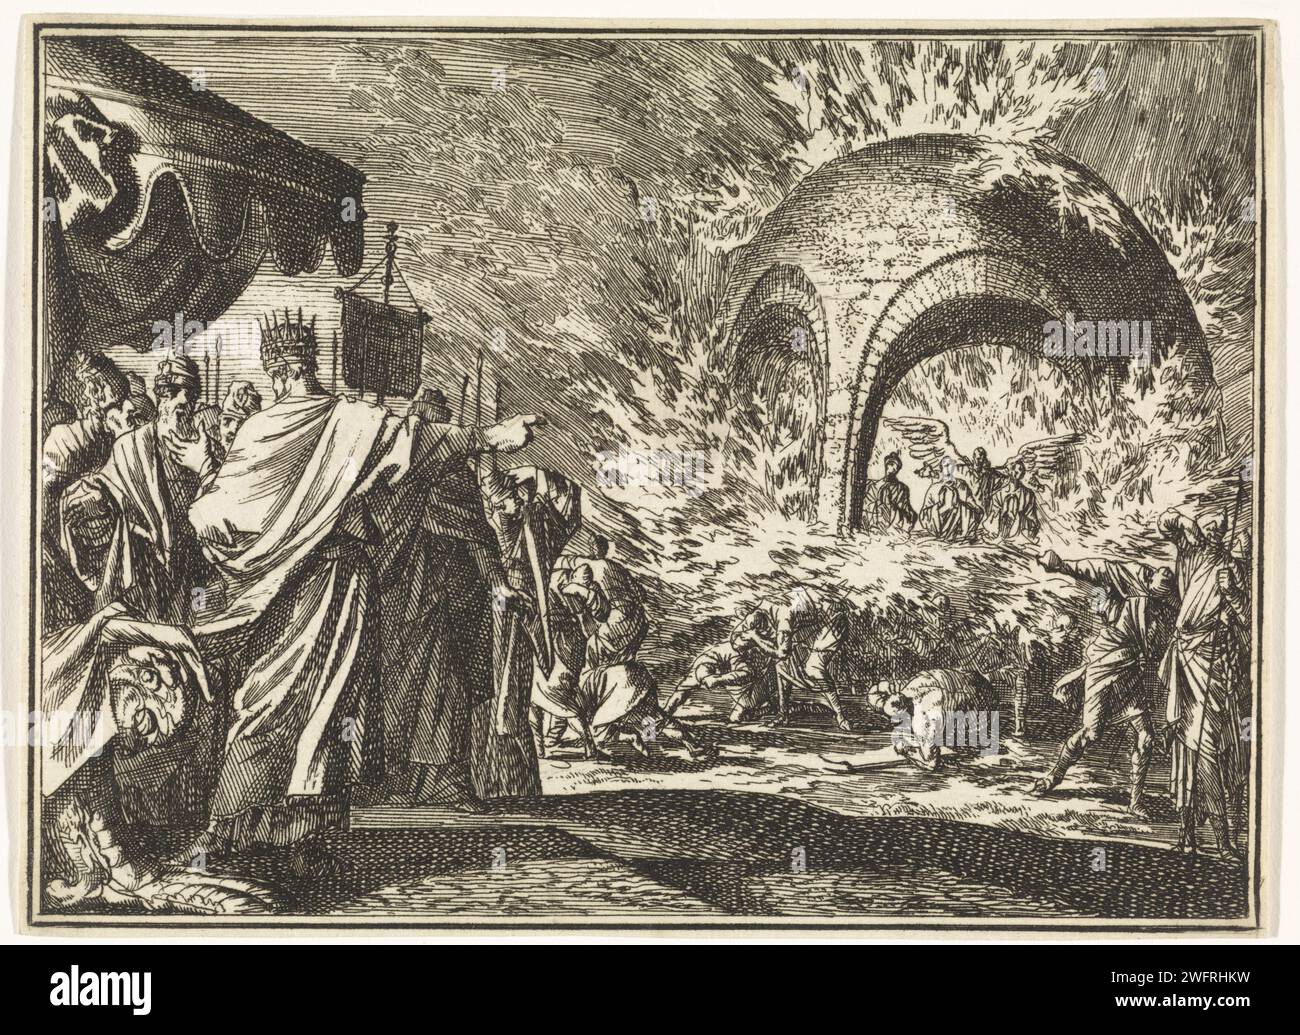 Nebuchadnezzar sees four people in the fiery oven, Jan Luyken, 1712 print  Amsterdam paper etching to his astonishment King Nebuchadnezzar sees four men (one of them usually represented as an angel) in the furnace; the king commands them to come forth Stock Photo